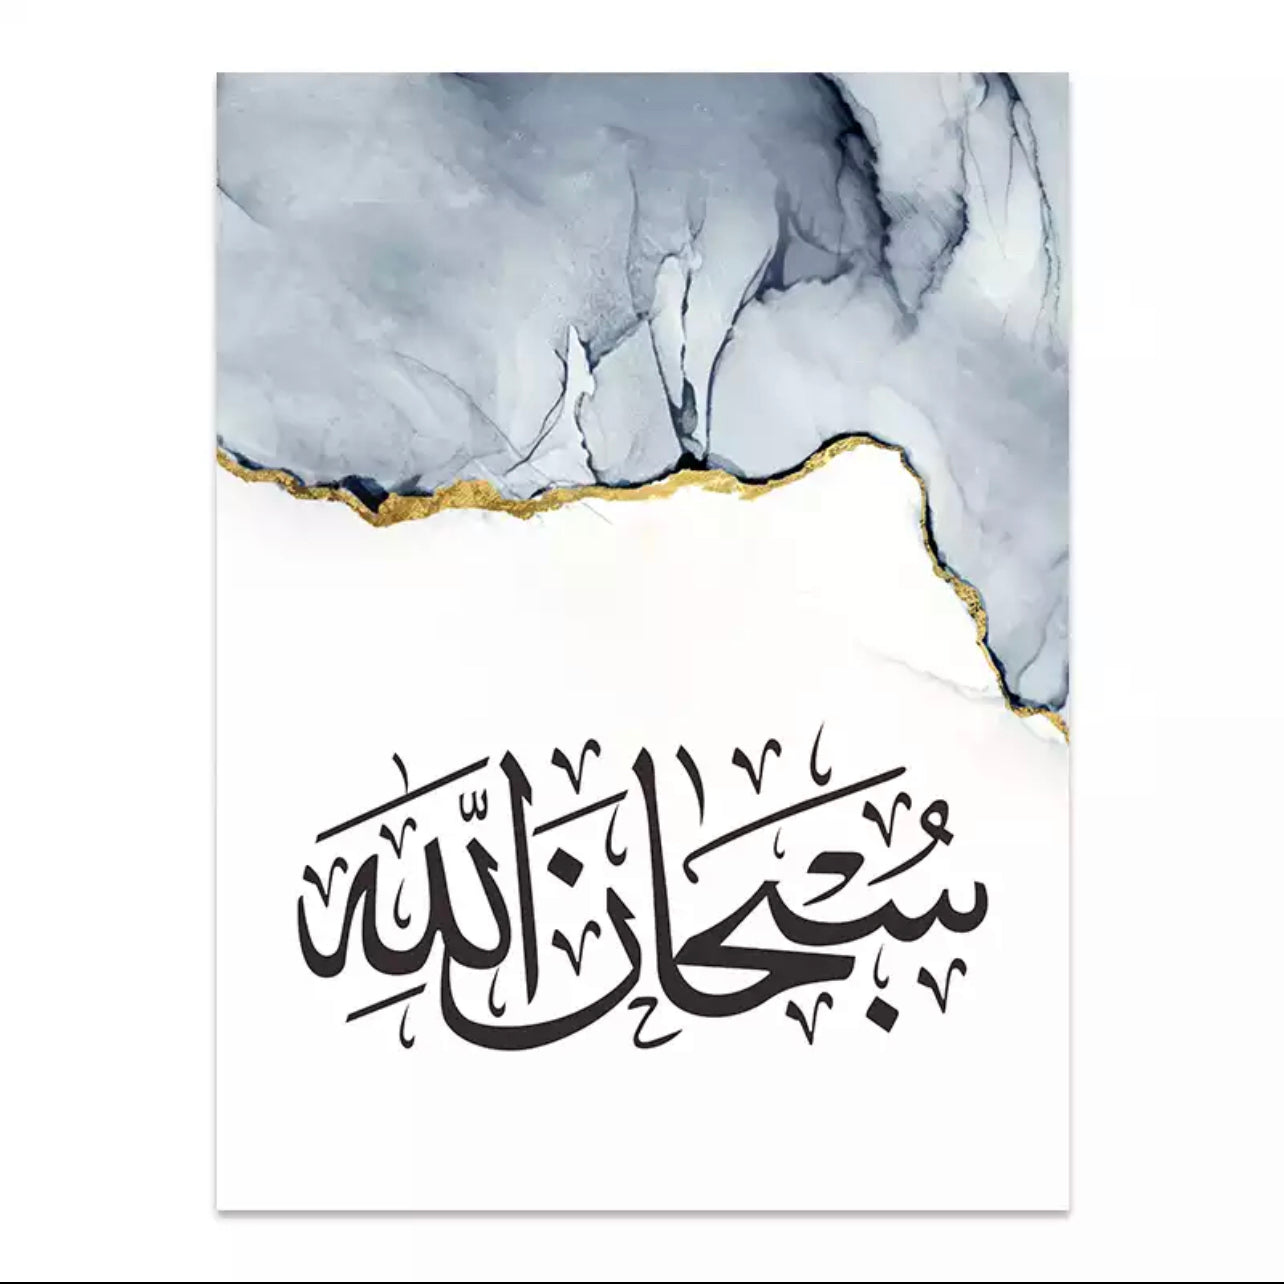 Watercolour Effect In Pink, Green And Blue With Black Islamic Calligraphy